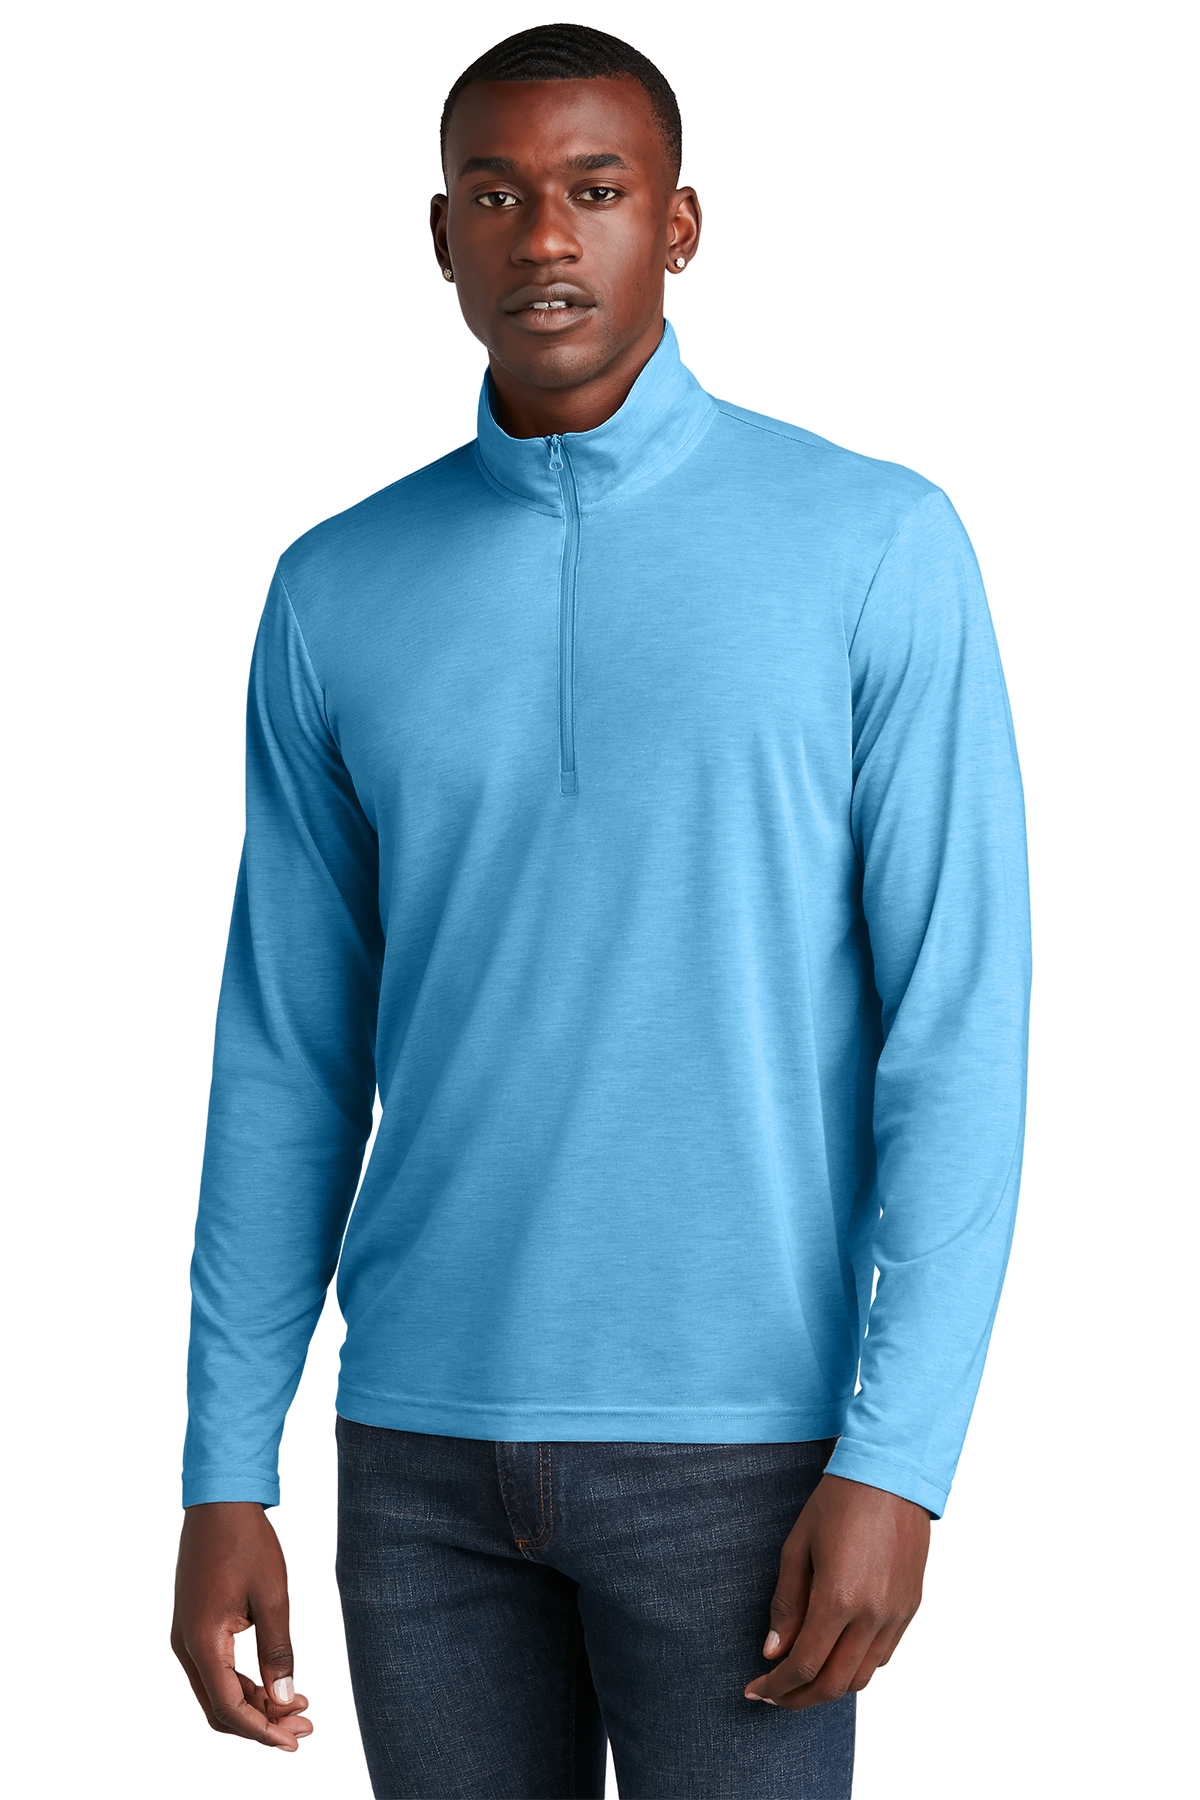 Sport-Tek PosiCharge Tri-Blend Wicking 1/4-Zip Pullover | Product ...